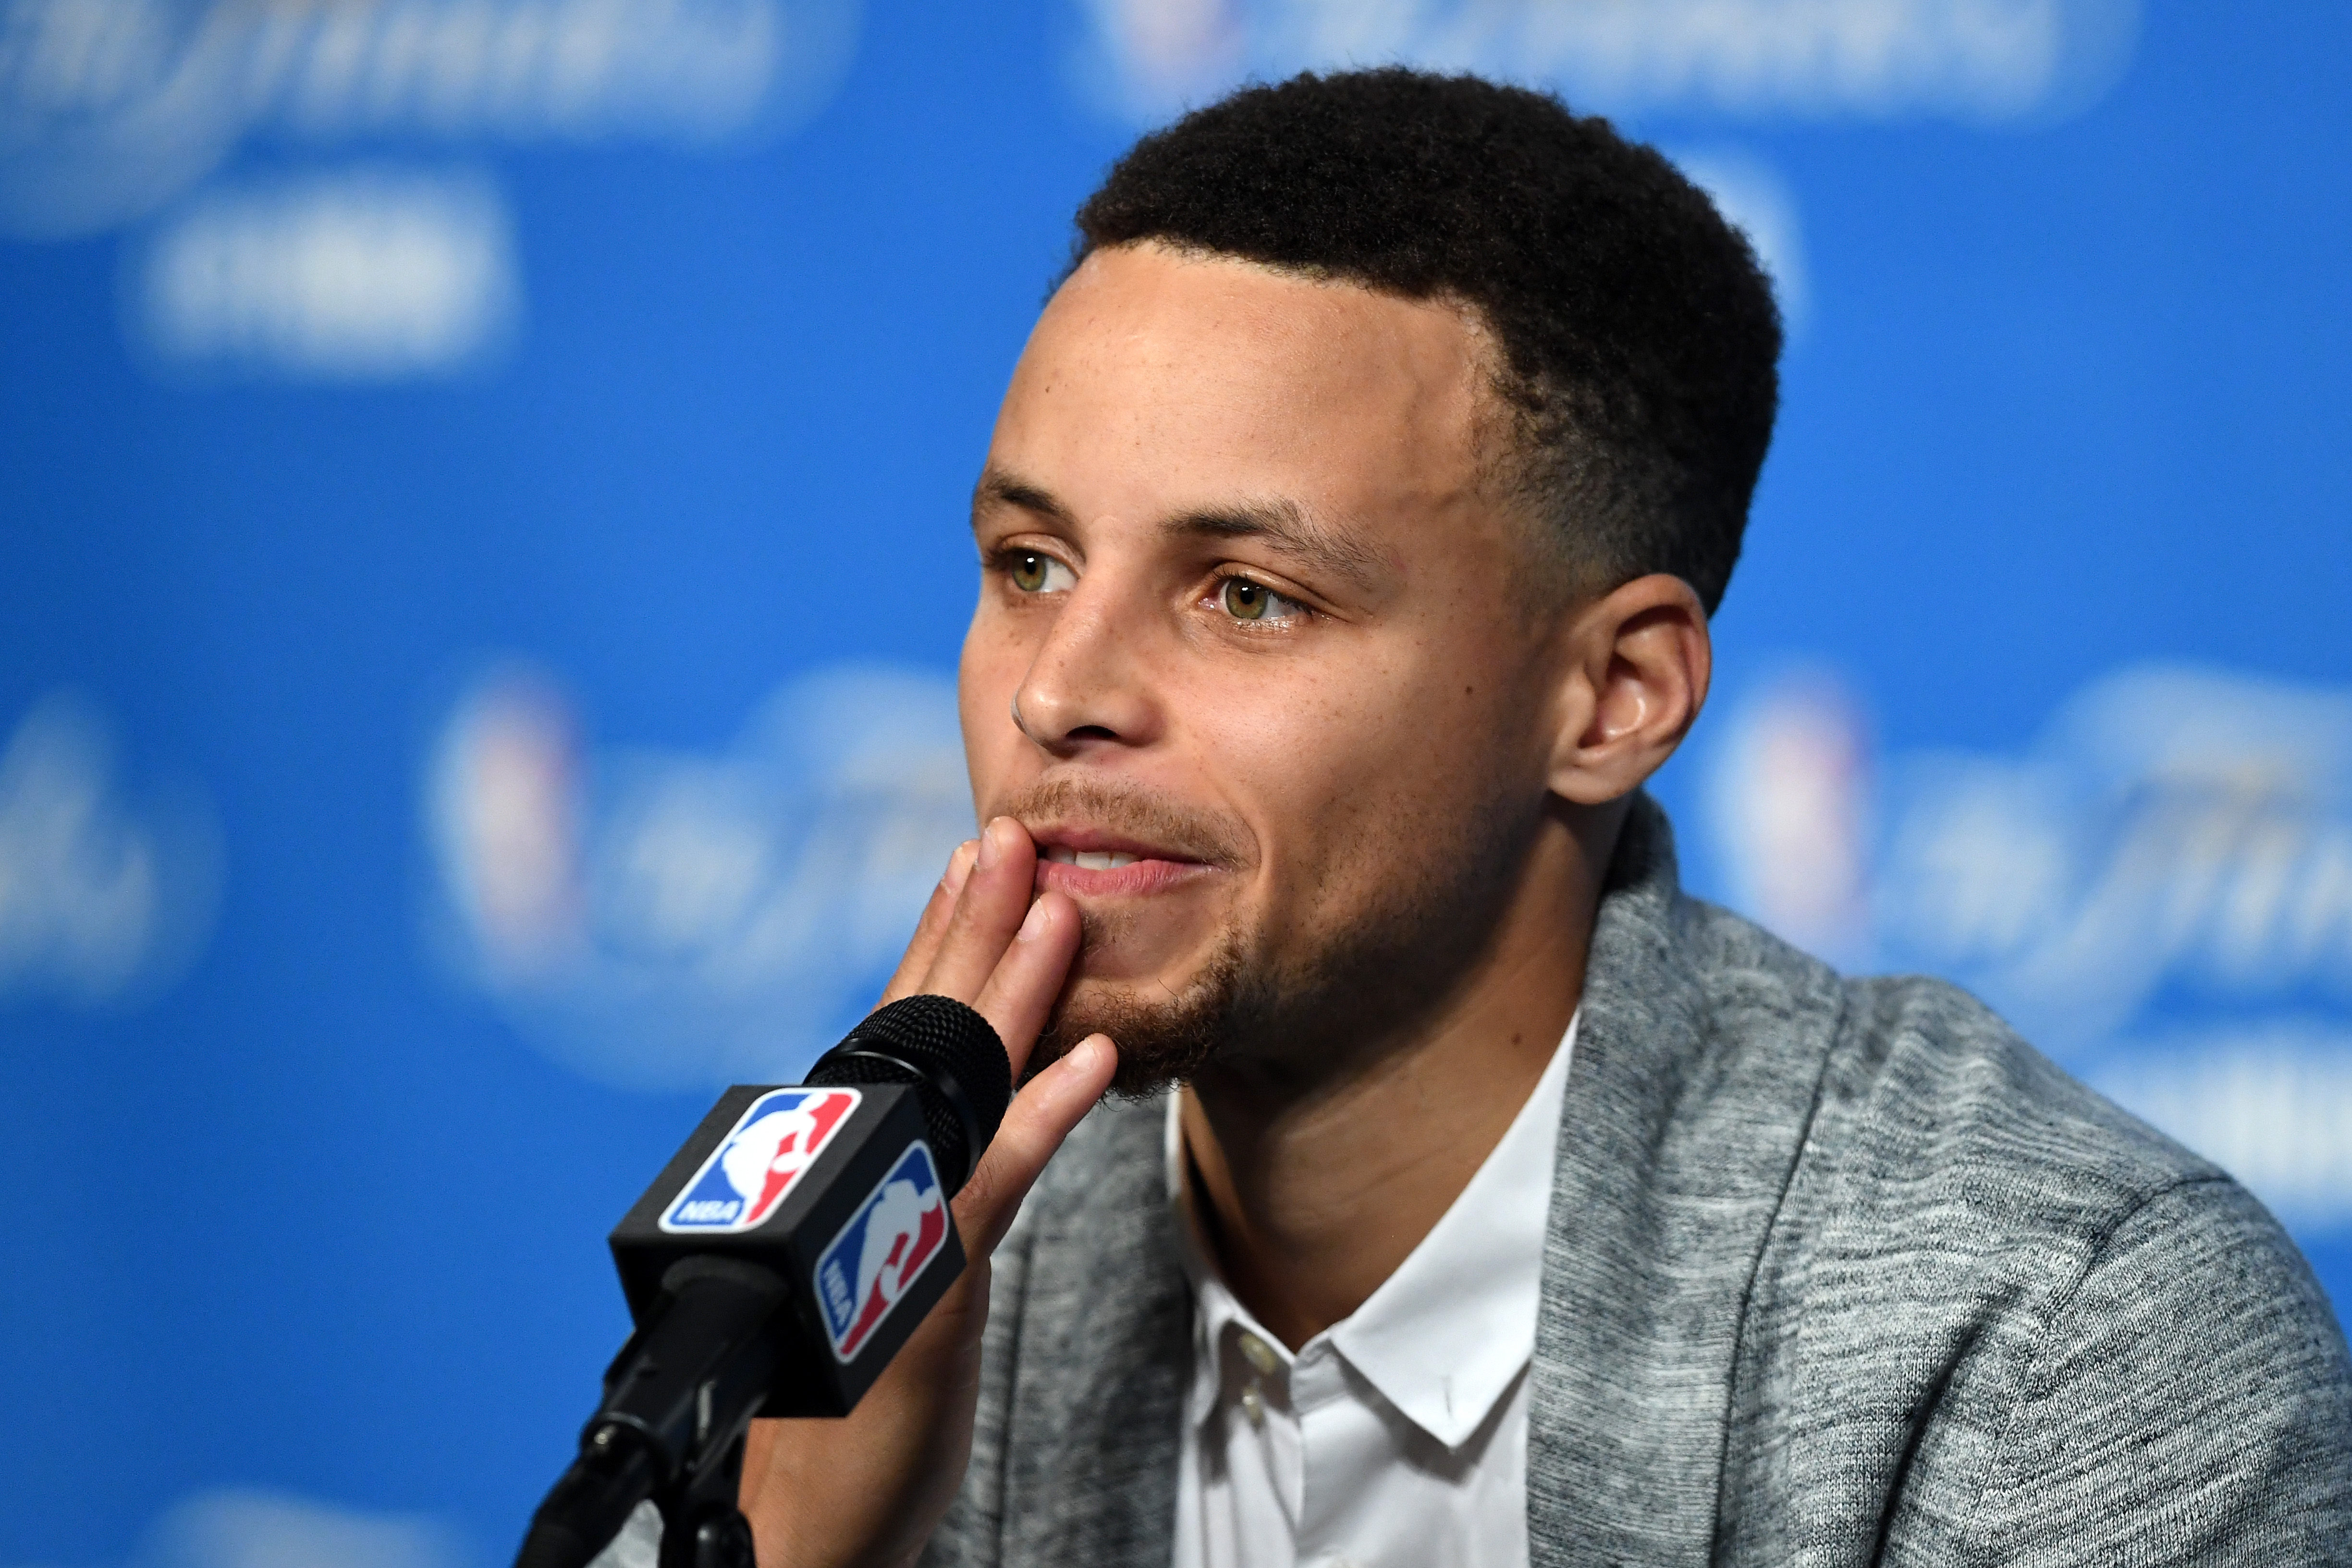 CLEVELAND, OH - JUNE 16: Stephen Curry #30 of the Golden State Warriors speaks to the media after being defeated by the Cleveland Cavaliers in Game 6 of the 2016 NBA Finals at Quicken Loans Arena on June 16, 2016 in Cleveland, Ohio. The Cavaliers defeated the Warriors 115-101. NOTE TO USER: User expressly acknowledges and agrees that, by downloading and or using this photograph, User is consenting to the terms and conditions of the Getty Images License Agreement. Jason Miller/Getty Images/AFP